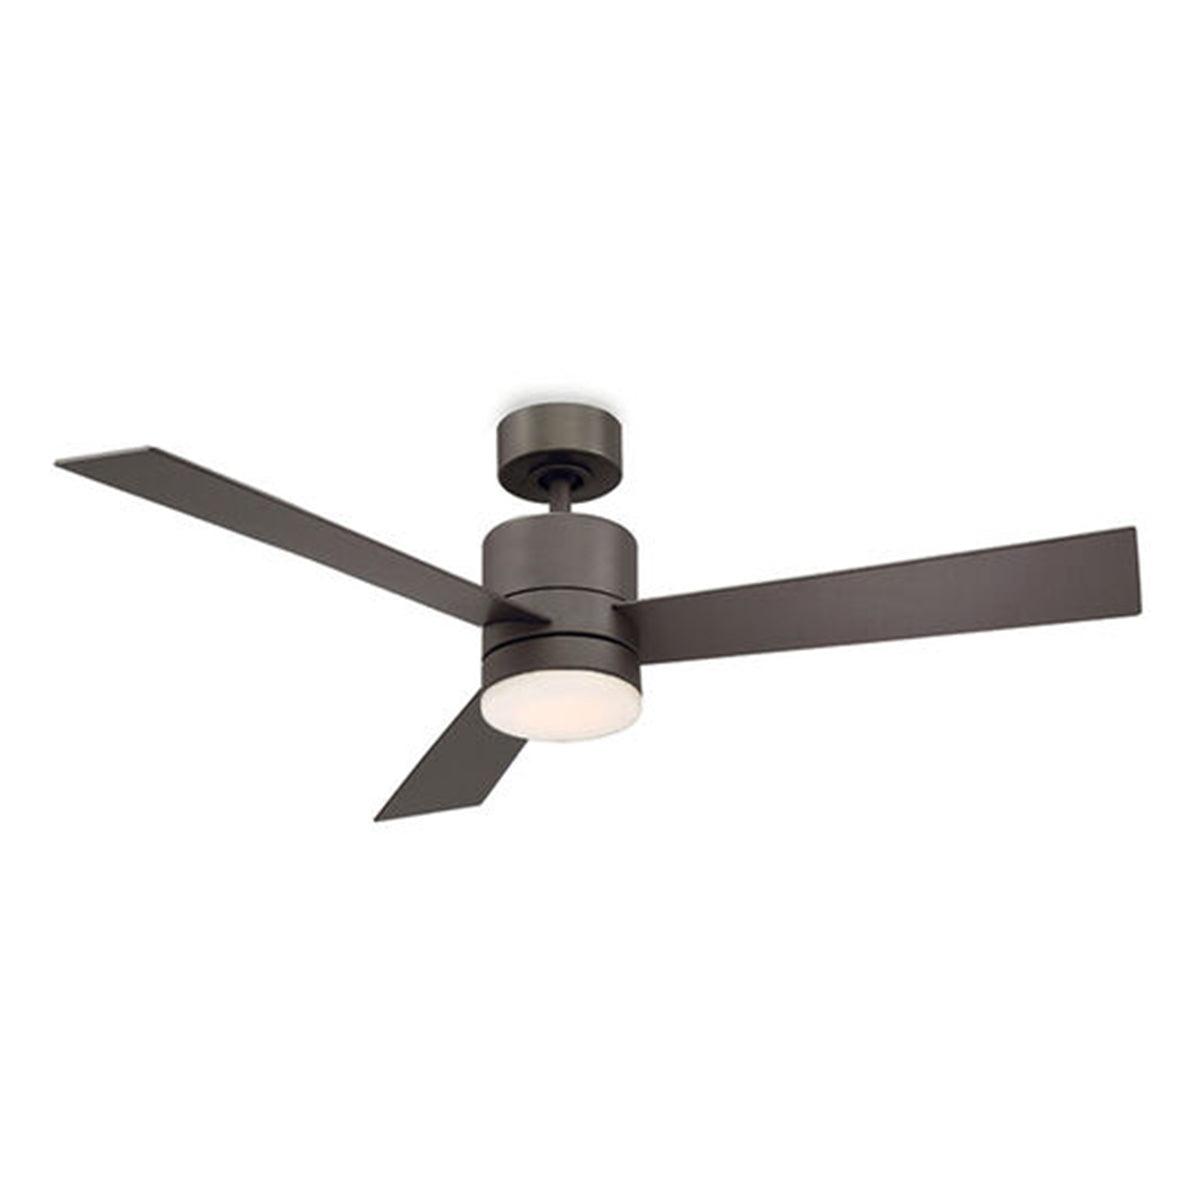 Axis 52 Inch Propeller Outdoor Smart Ceiling Fan With 2700K LED And Remote